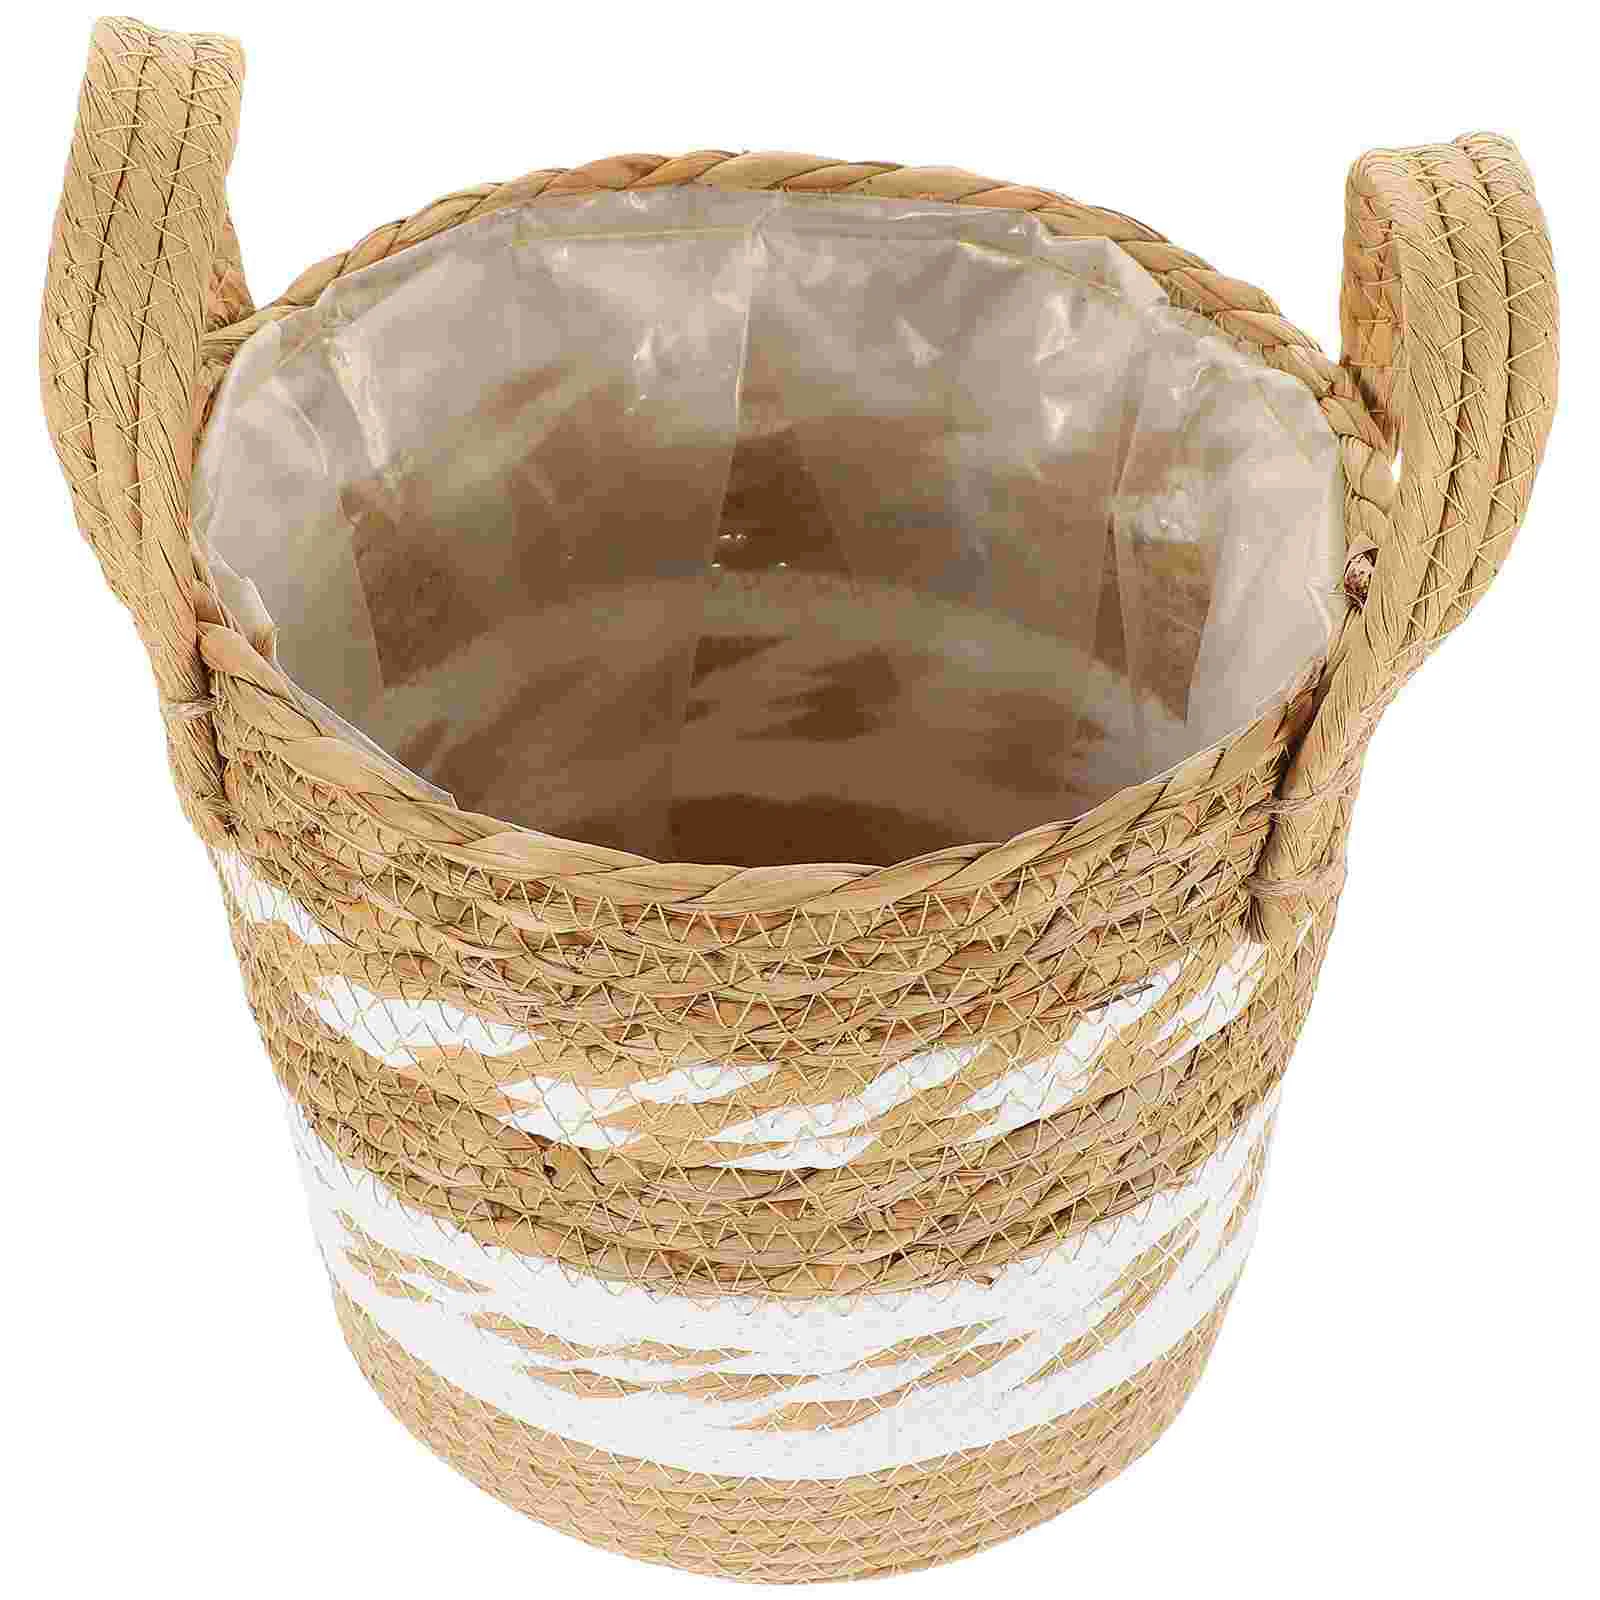 

Basket Woven Planter Seagrass Pot Rattan Baskets Container Storage Large Organizer Belly Grocery Flower Straw Rustic Wicker